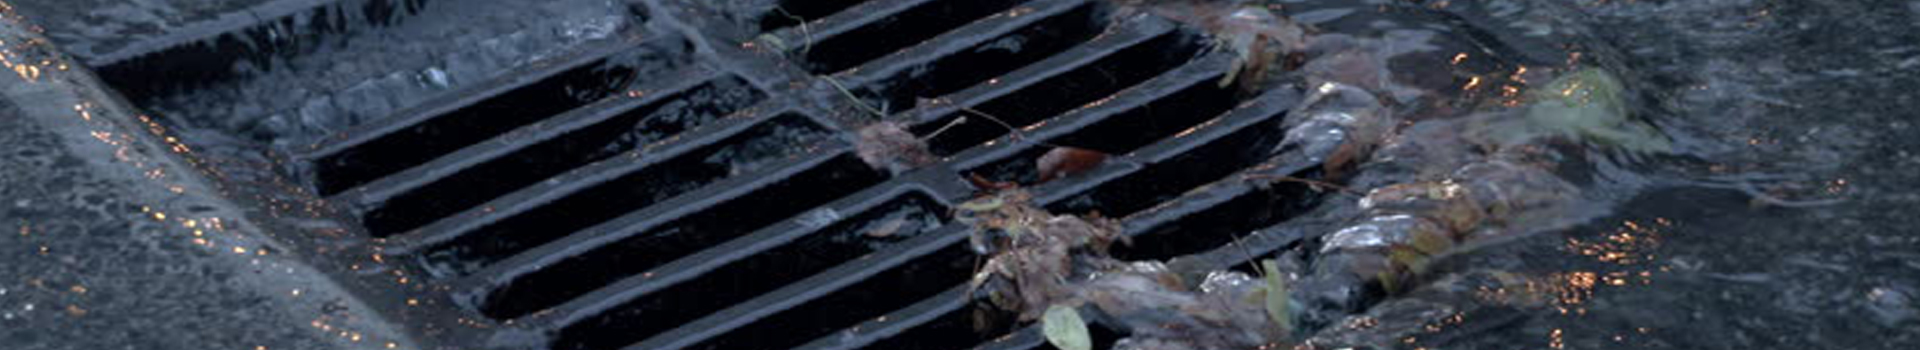 Pests We Treat - Broken Grease Trap Causes Drain Fly Problem in Rumson, NJ